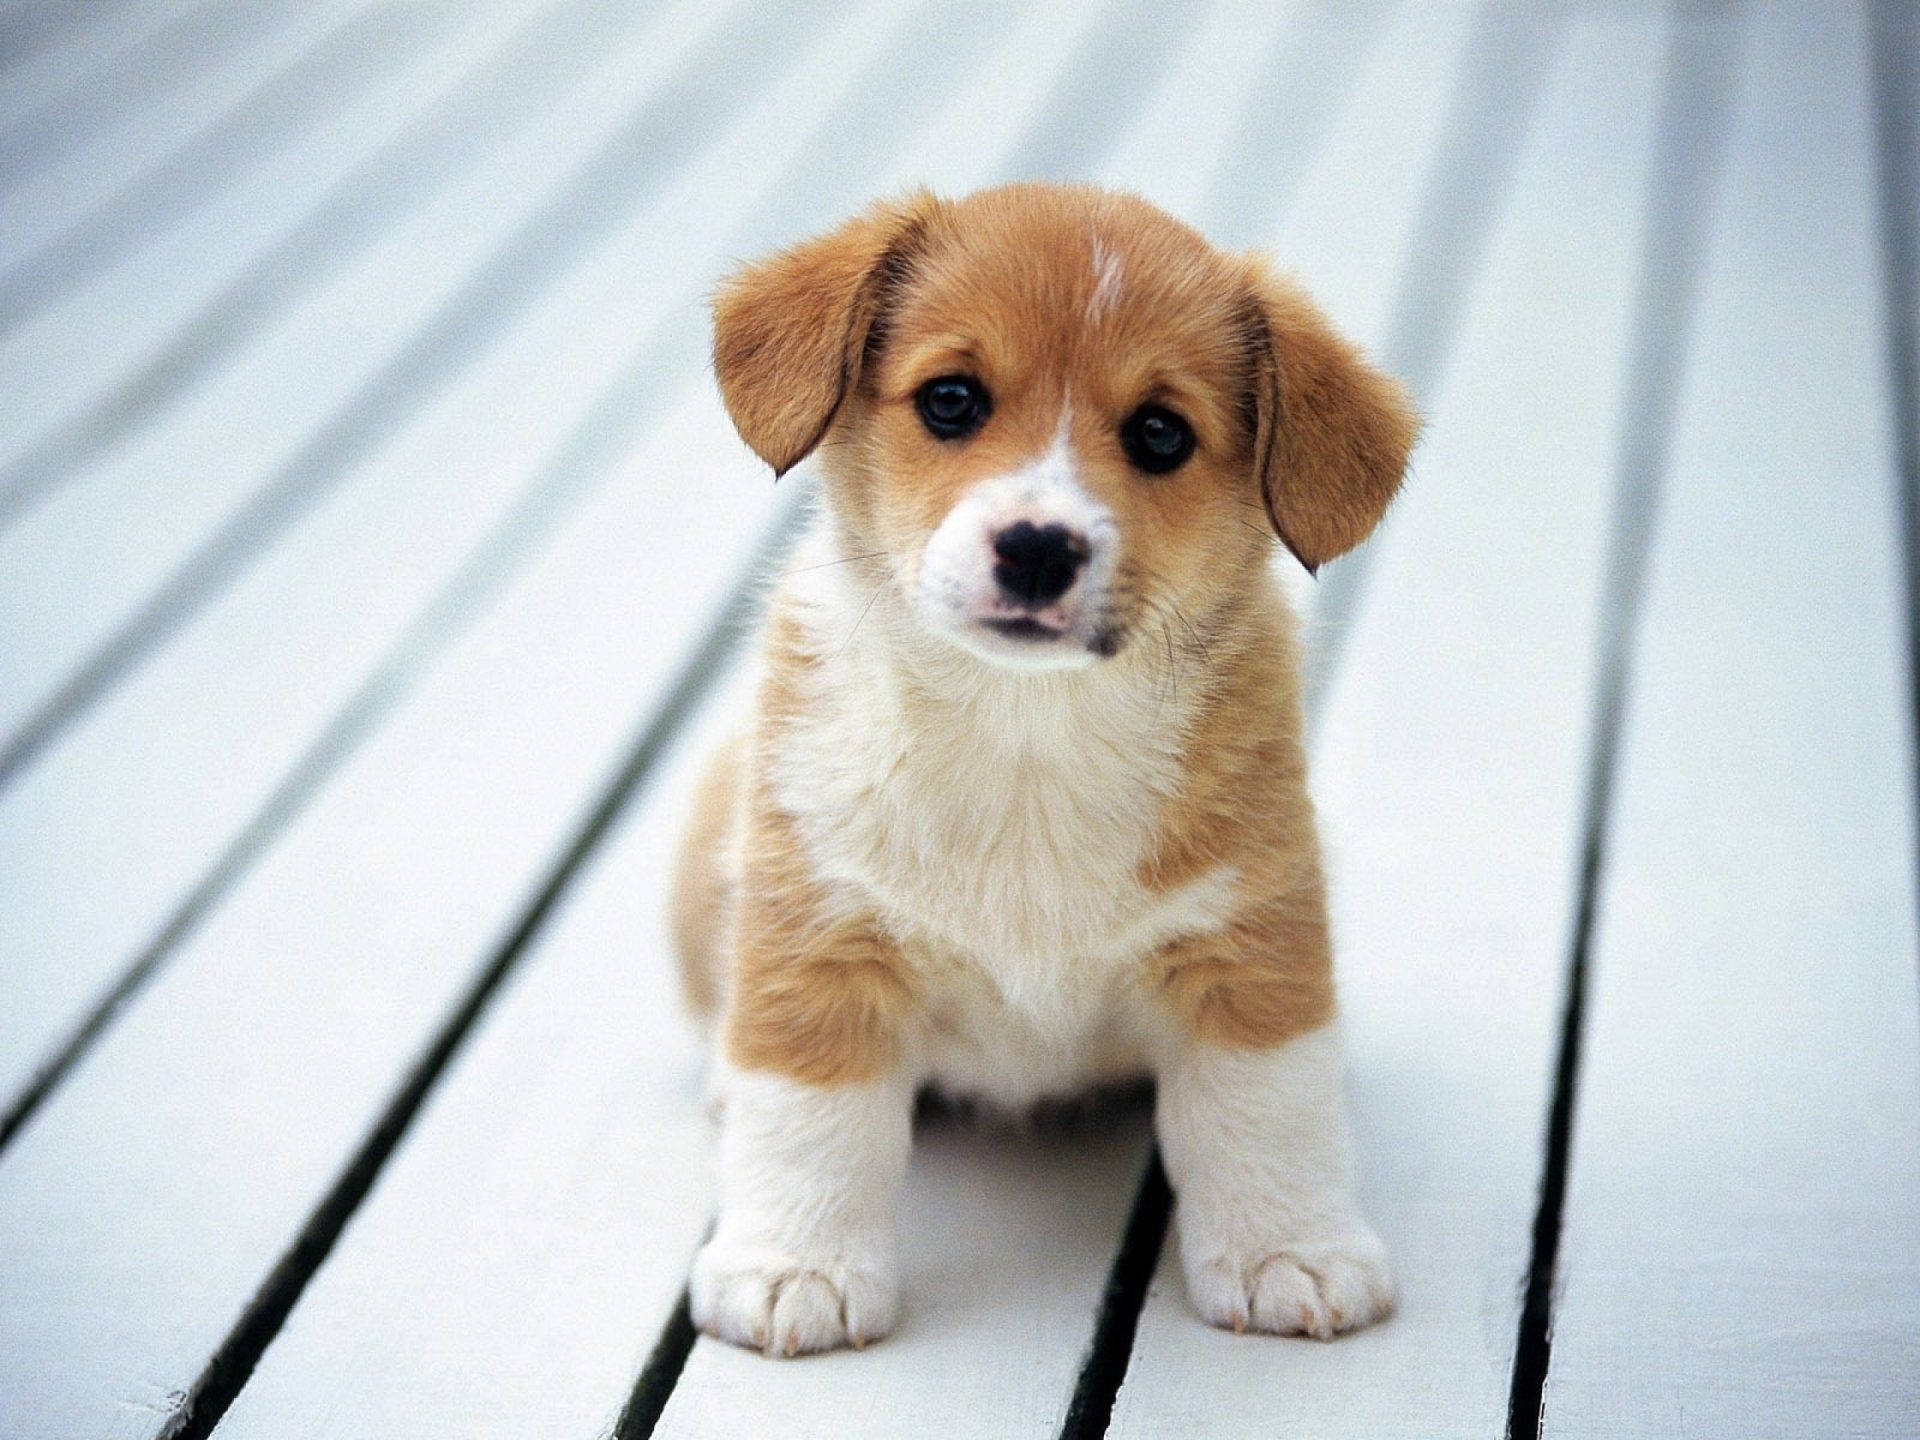 Staring Puppy Picture